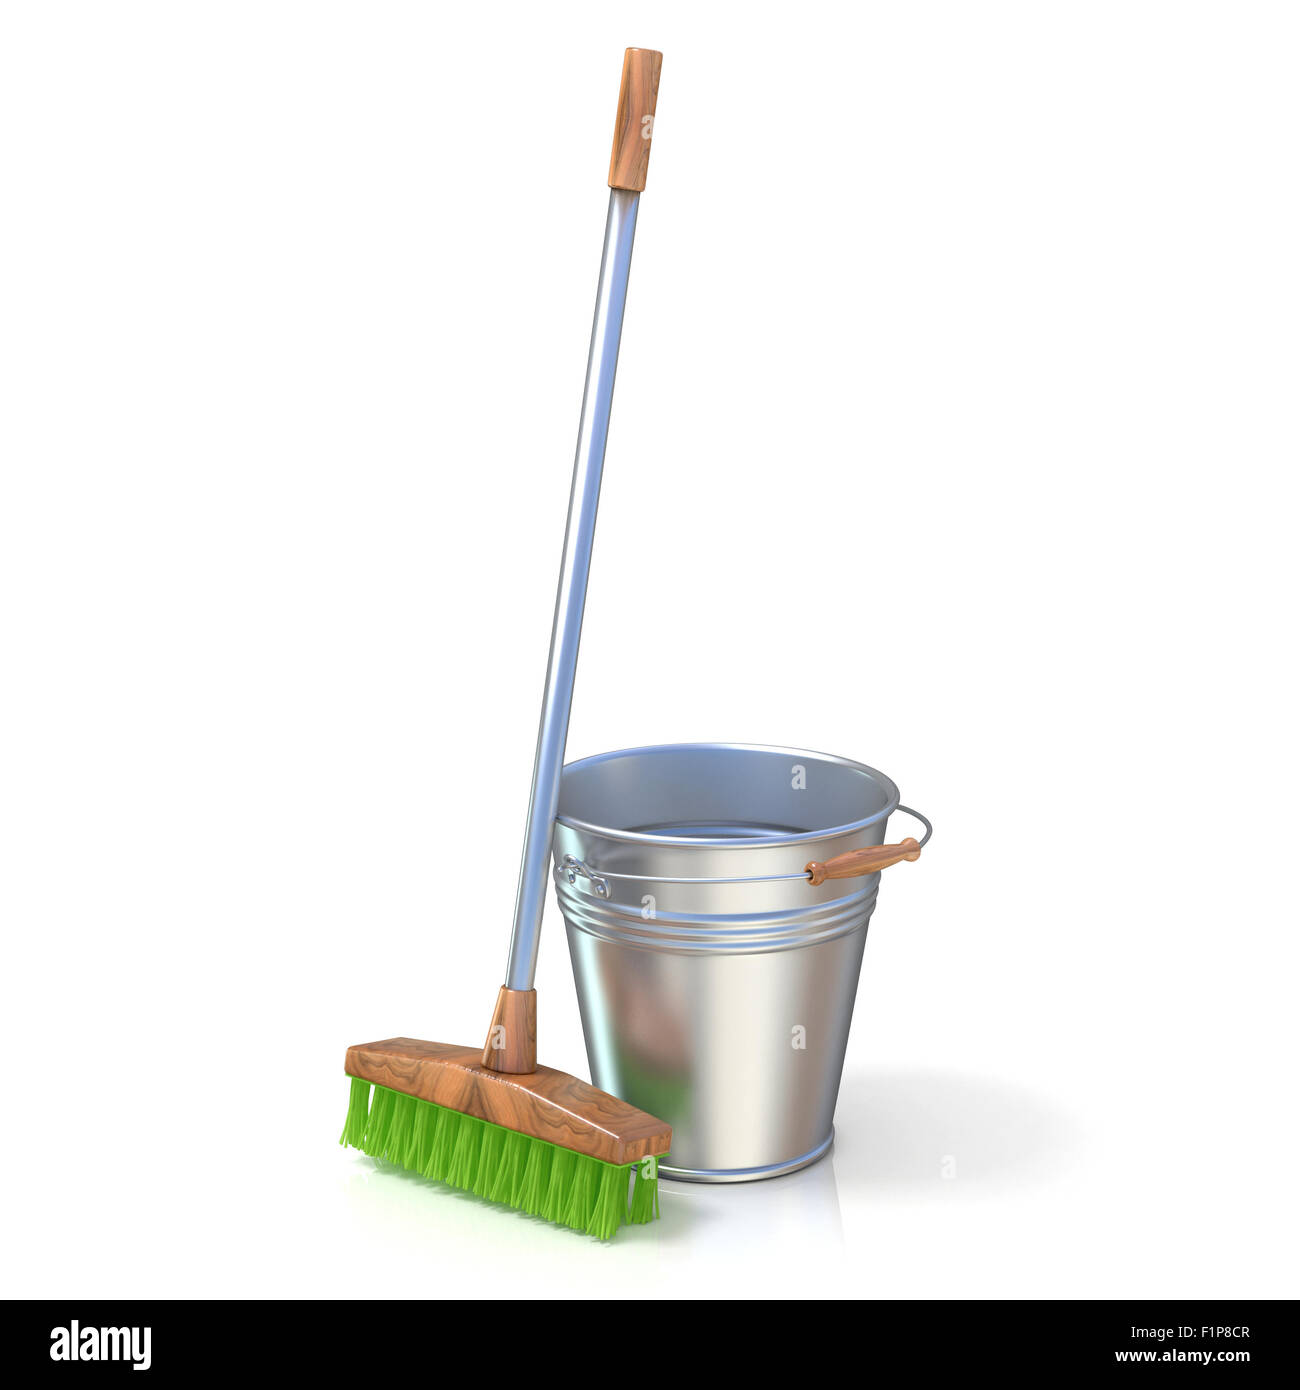 https://c8.alamy.com/comp/F1P8CR/cleaning-equipment-bucket-and-mop-3d-render-isolated-on-white-background-F1P8CR.jpg